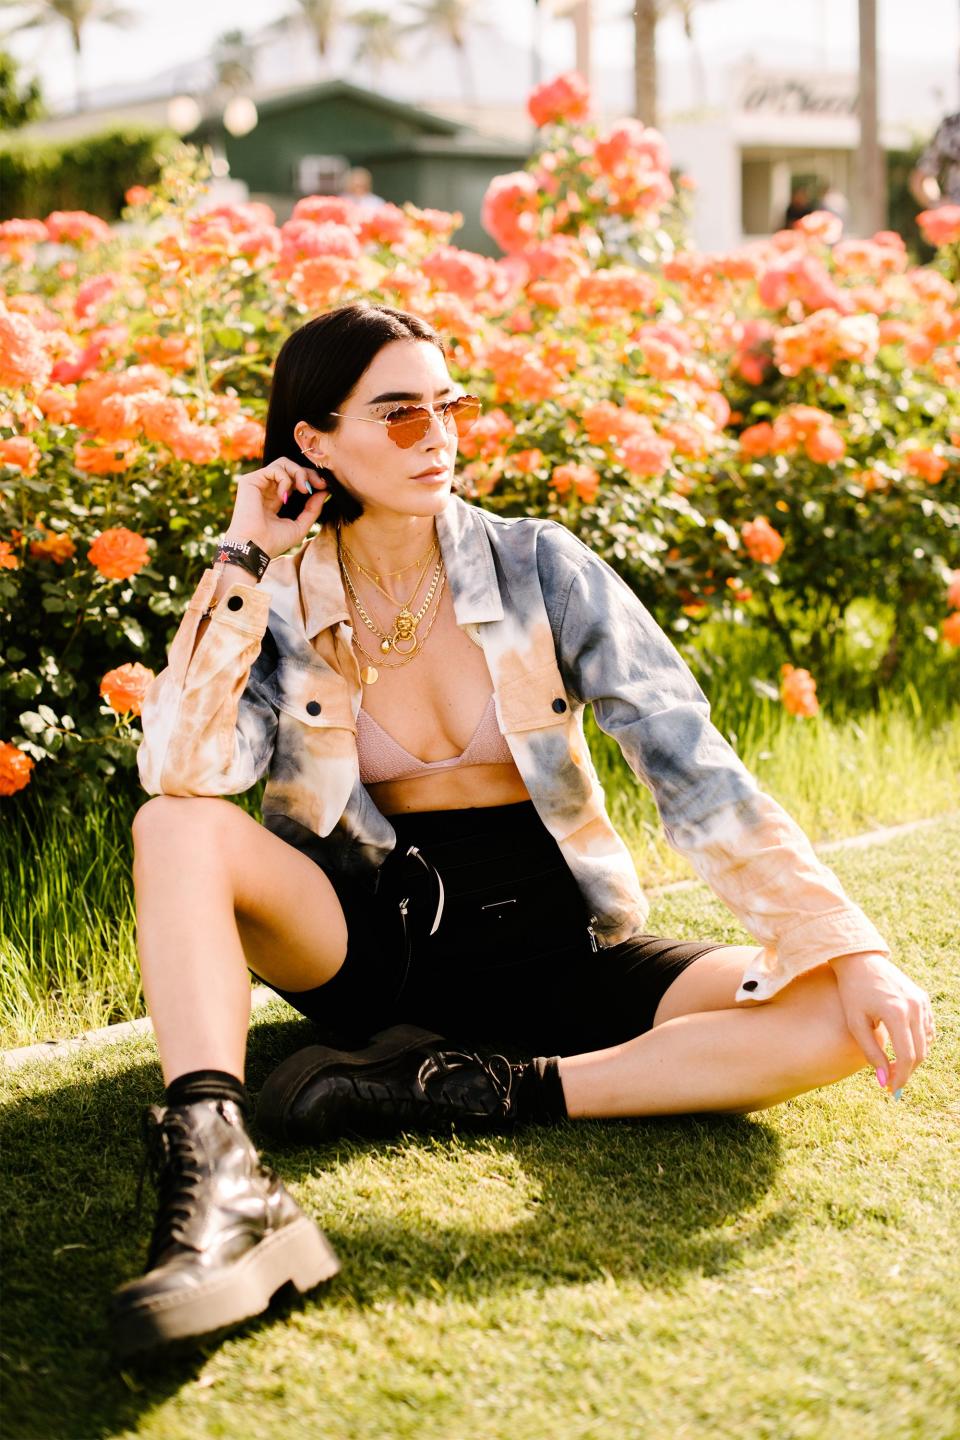 Music Festival Outfit Ideas That Aren't Cliché or Basic